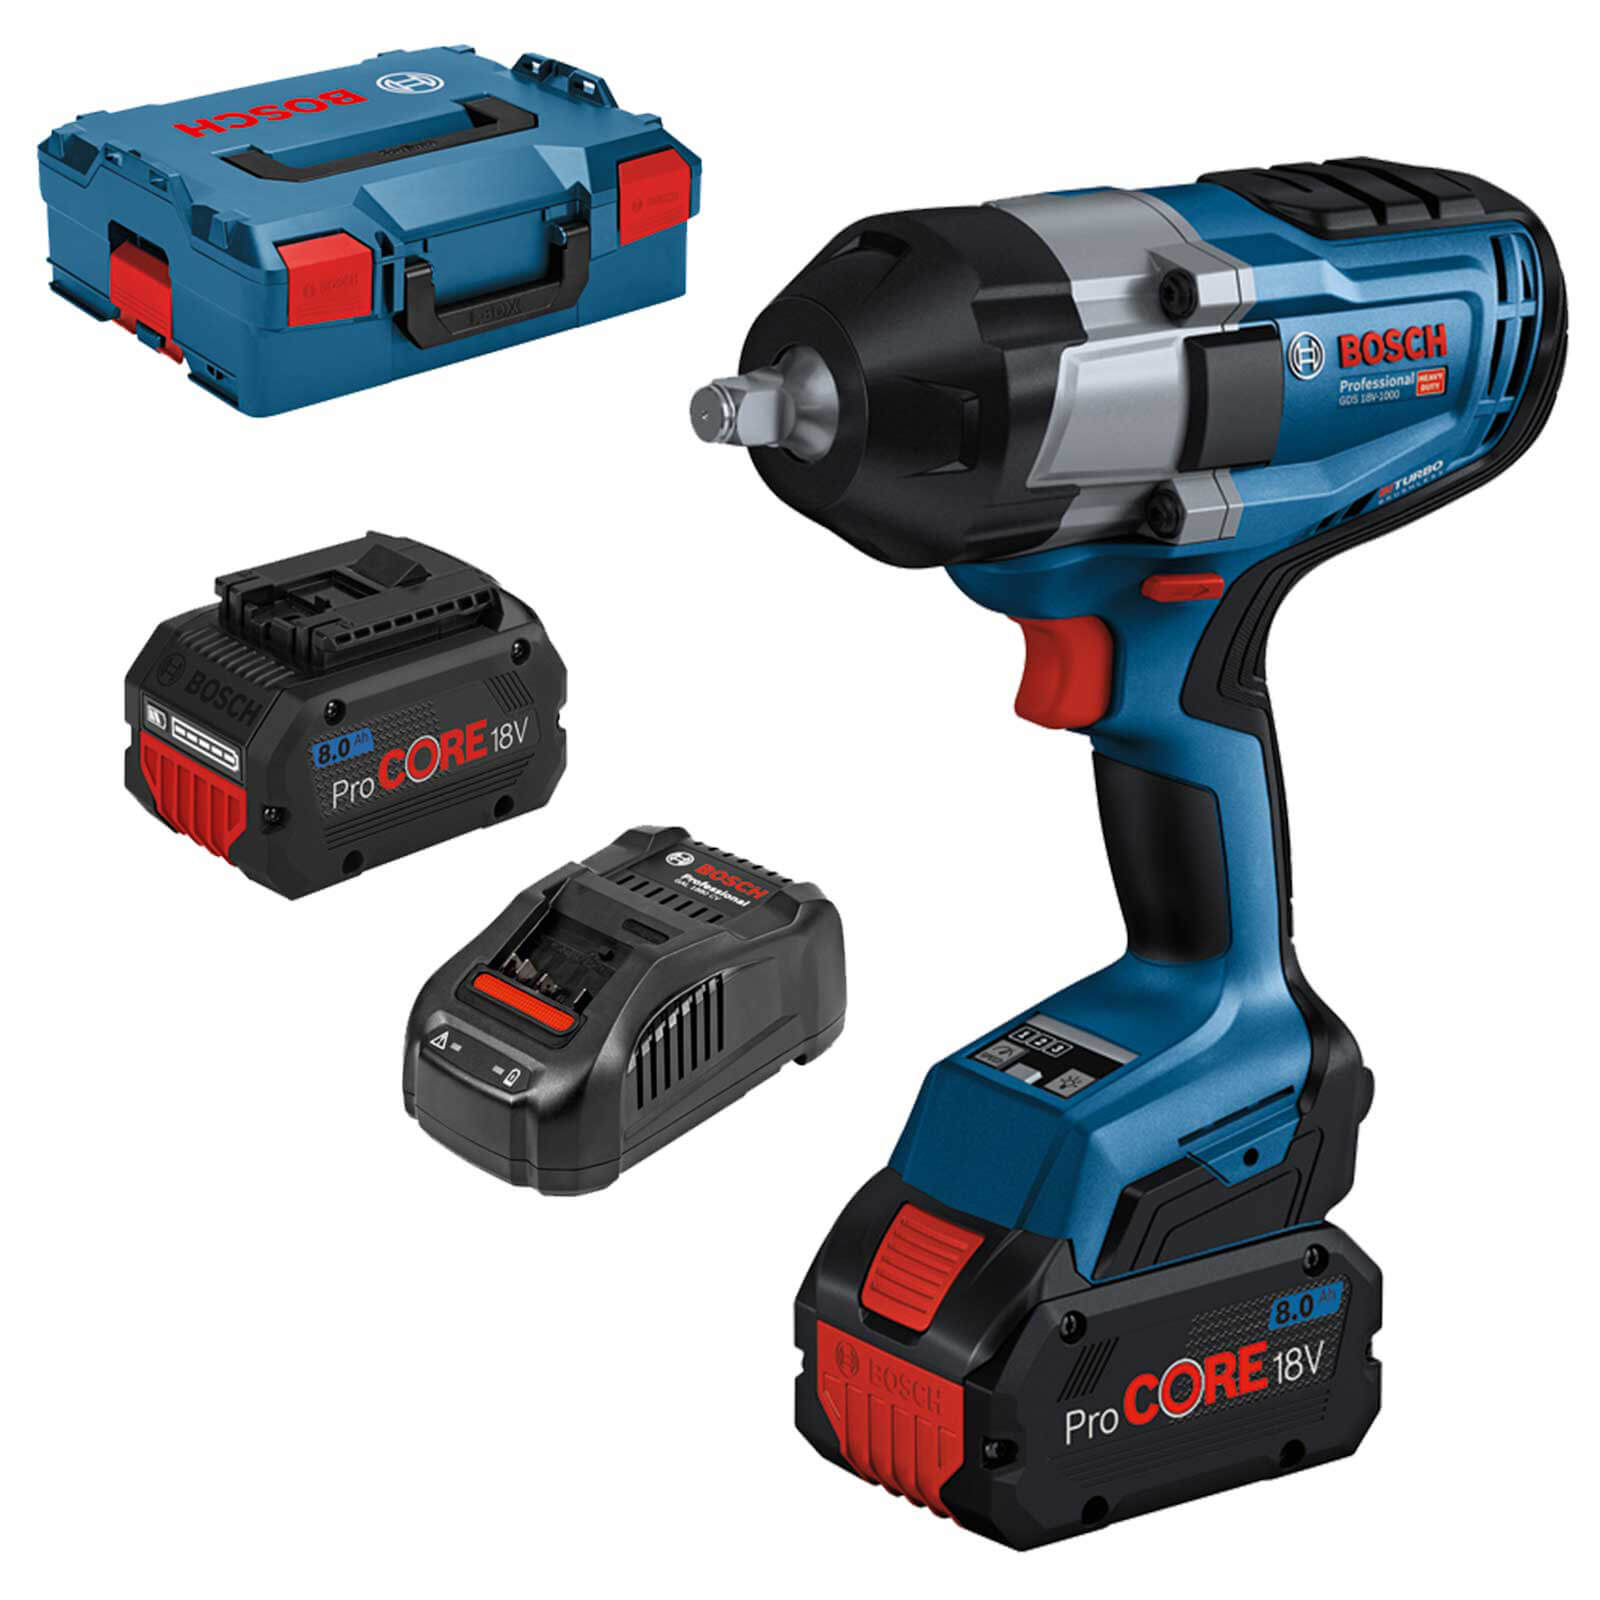 Image of Bosch GDS 18V-1000 BITURBO 18v Cordless Brushless High Torque ½” Drive Impact Wrench 2 x 8ah Li-ion ProCore Charger Case